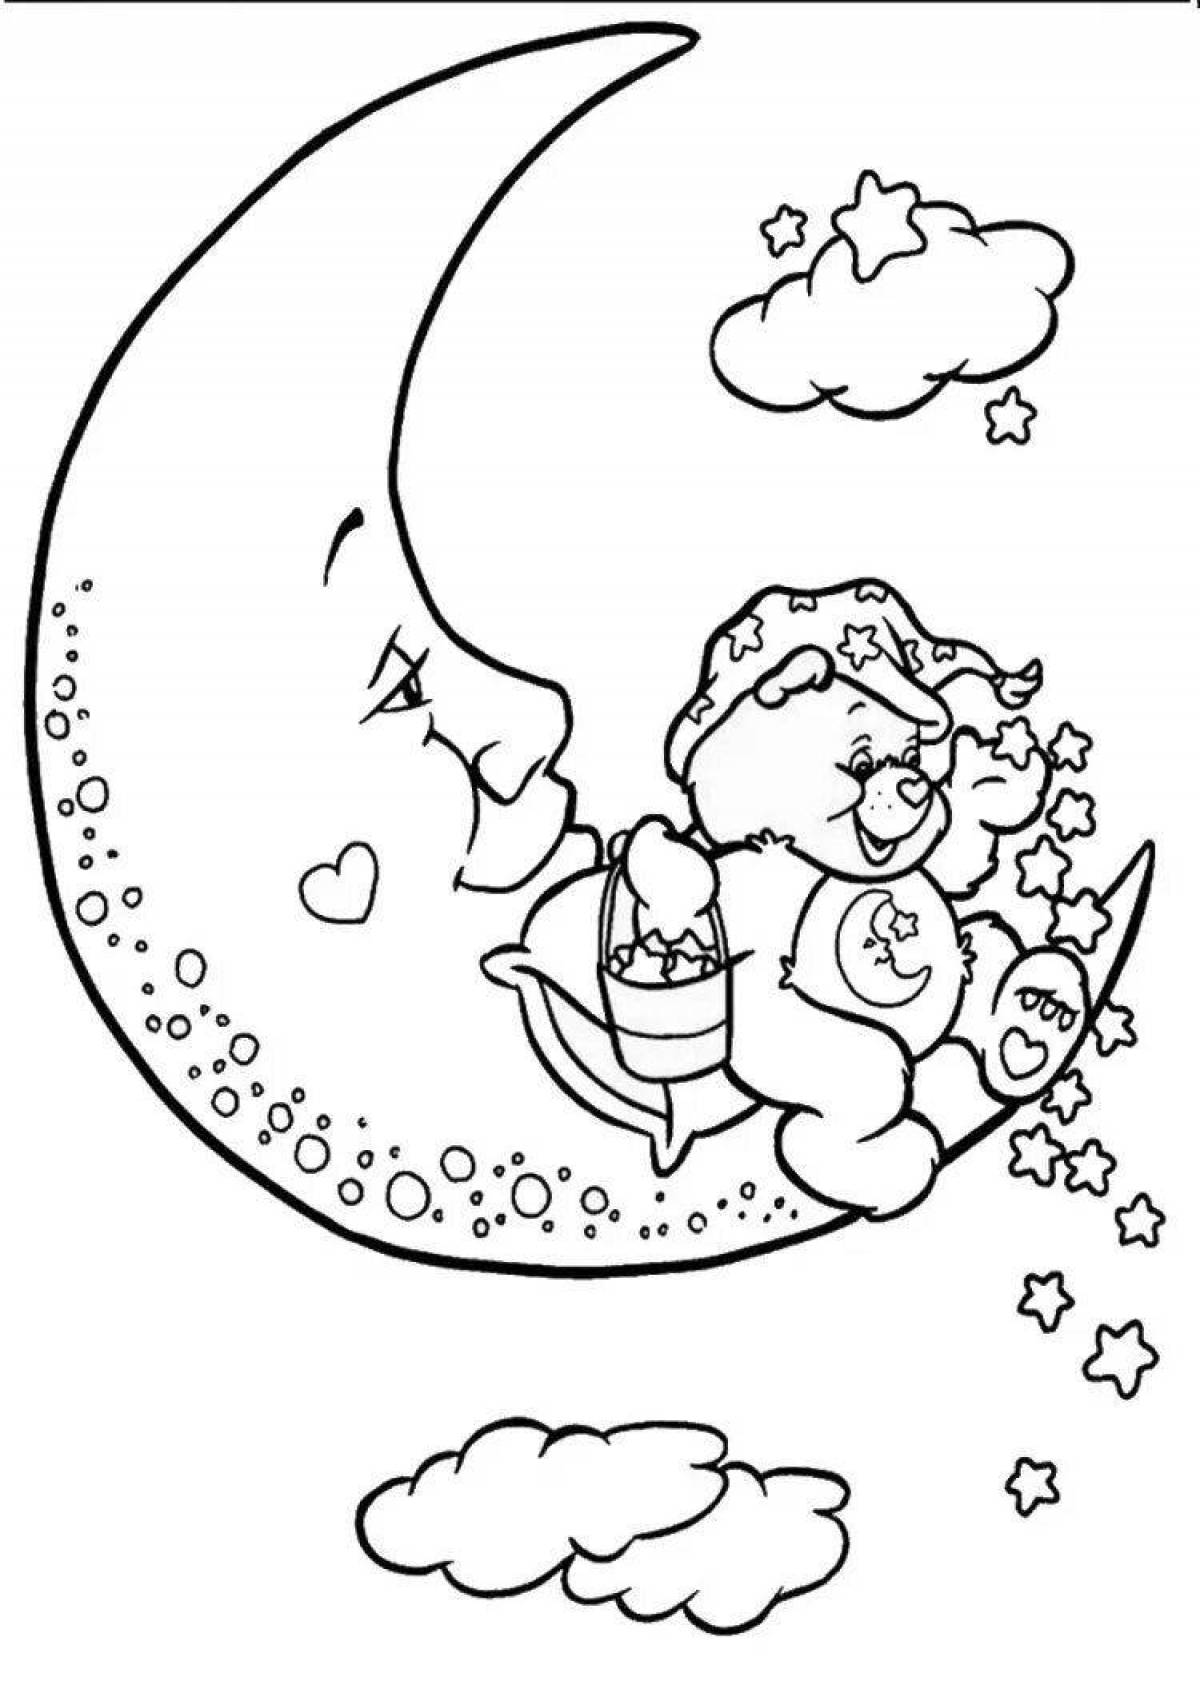 Colouring awesome bear on the moon